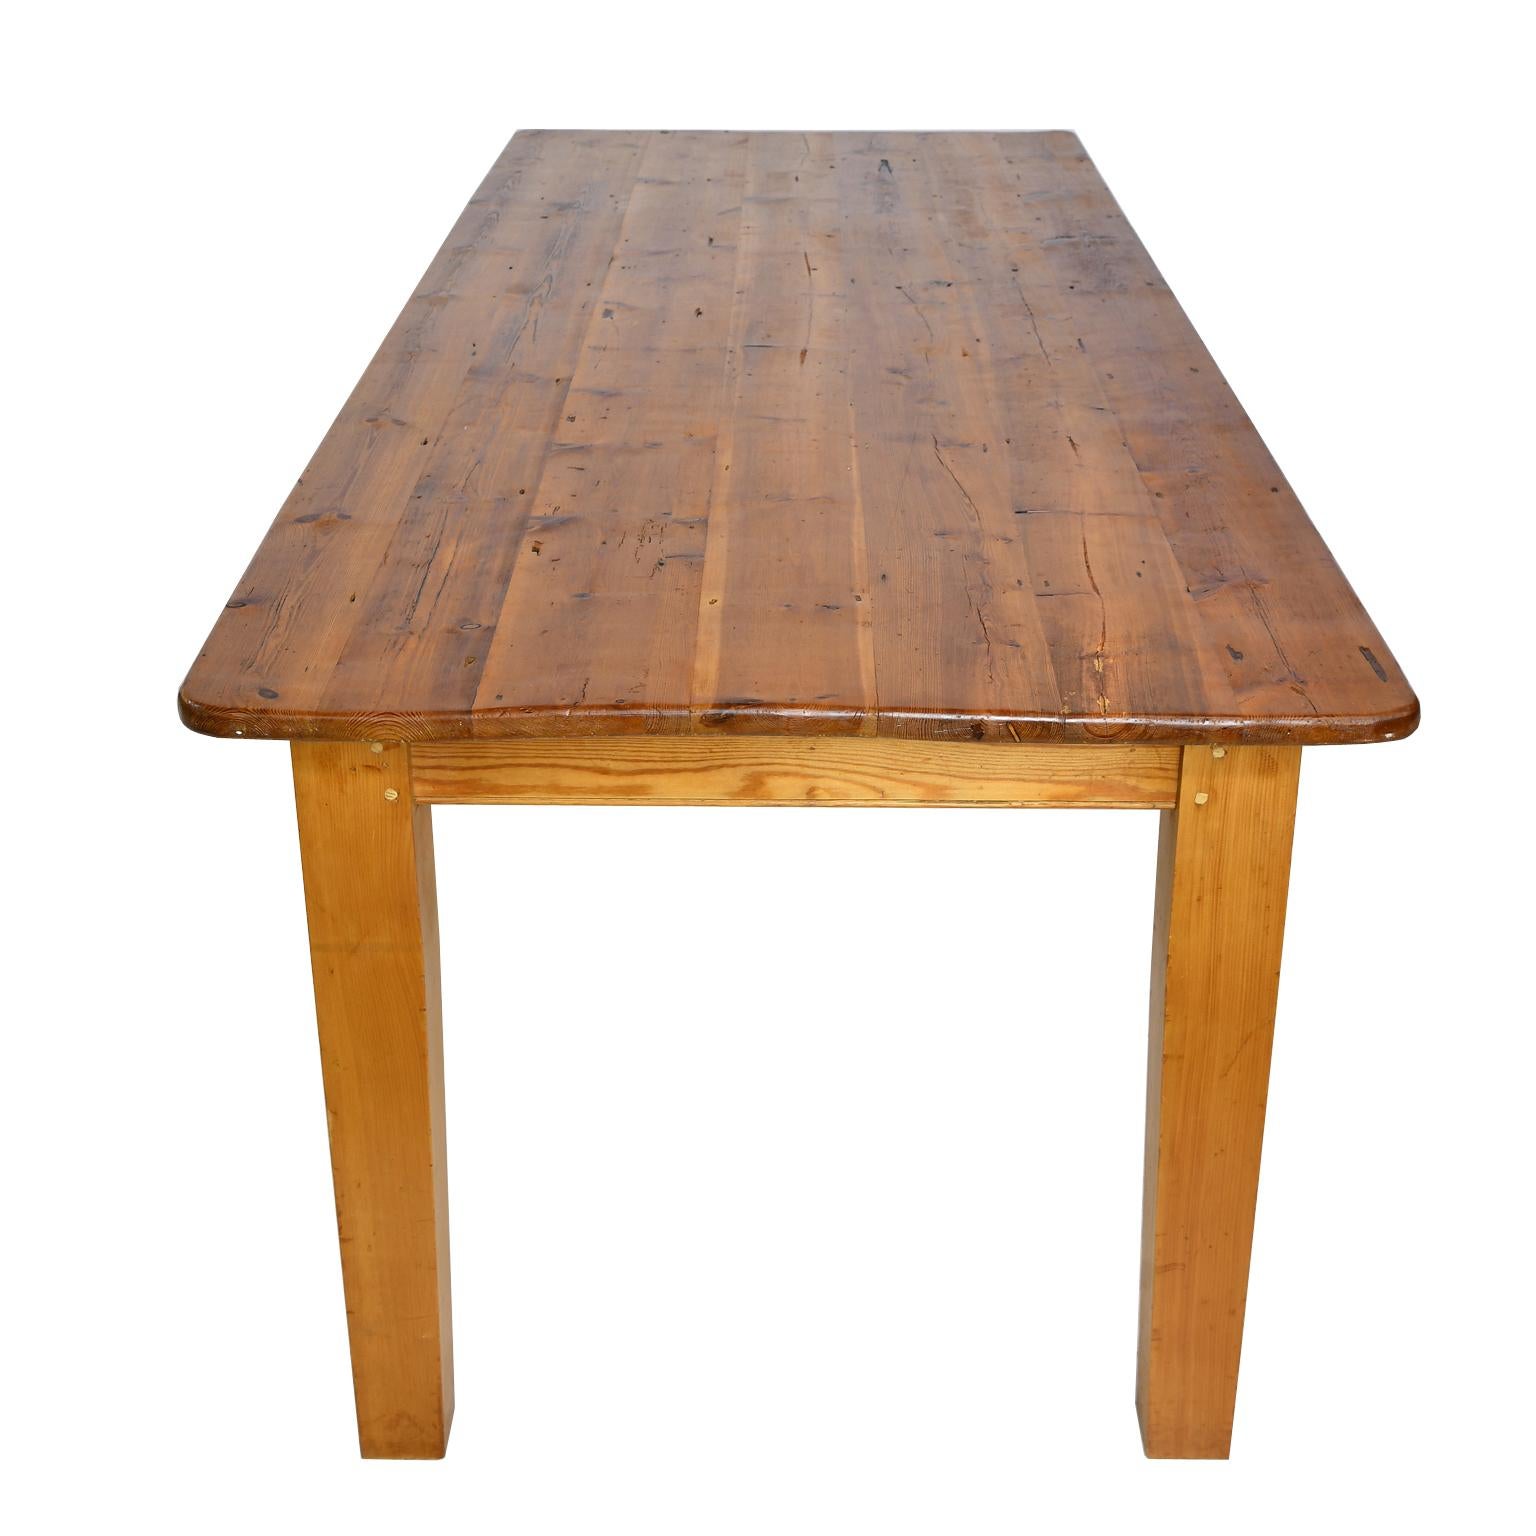 Country Long English Pine Farmhouse Dining Table with Tapered Legs and Antique Plank Top